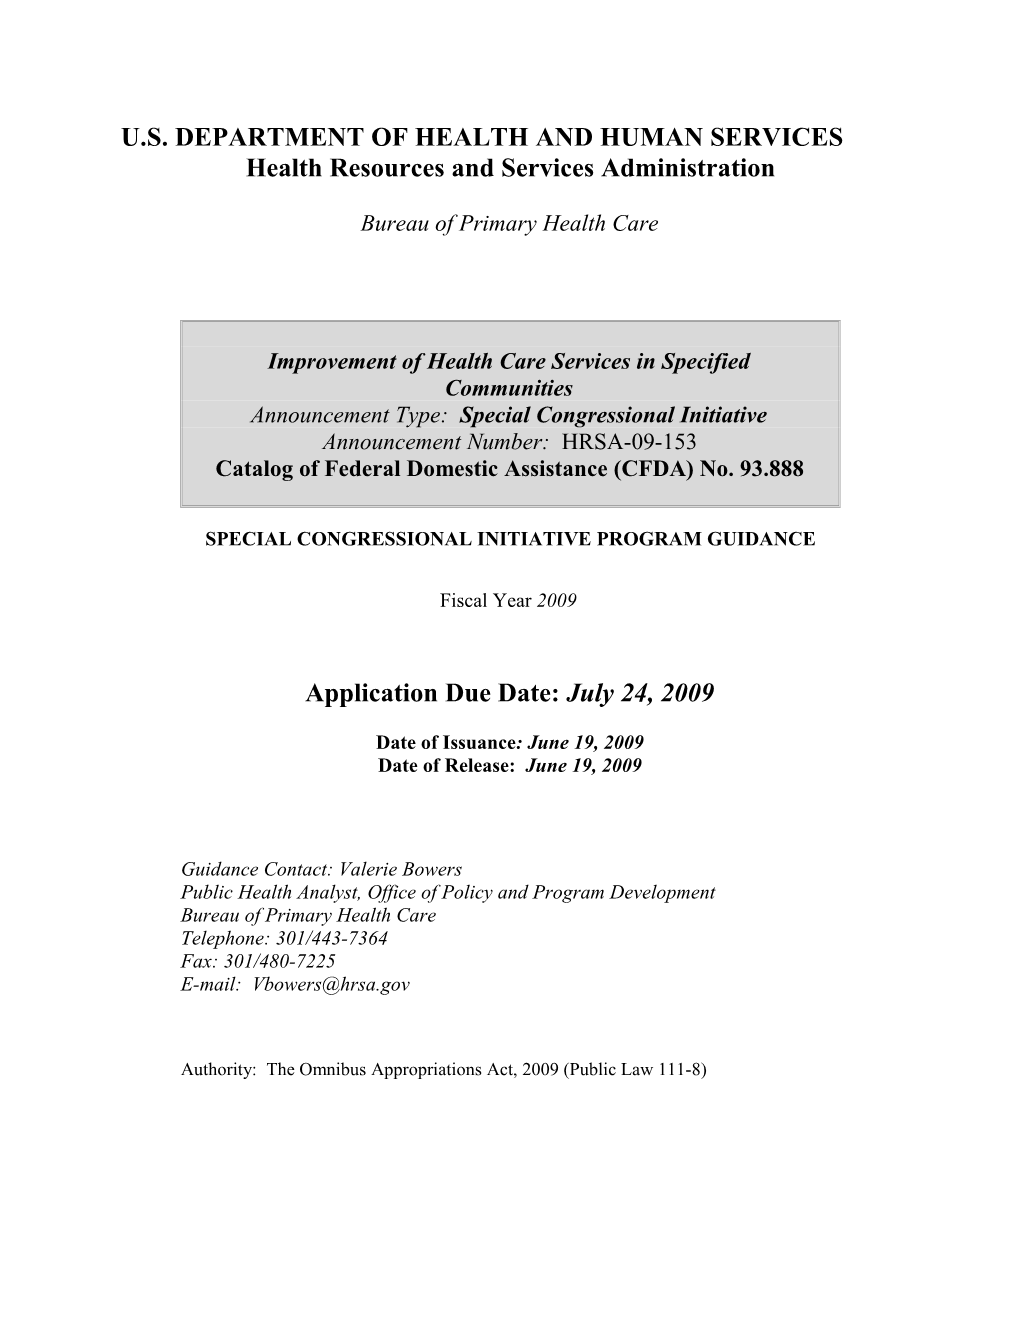 U.S. Department of Health and Human Services s4